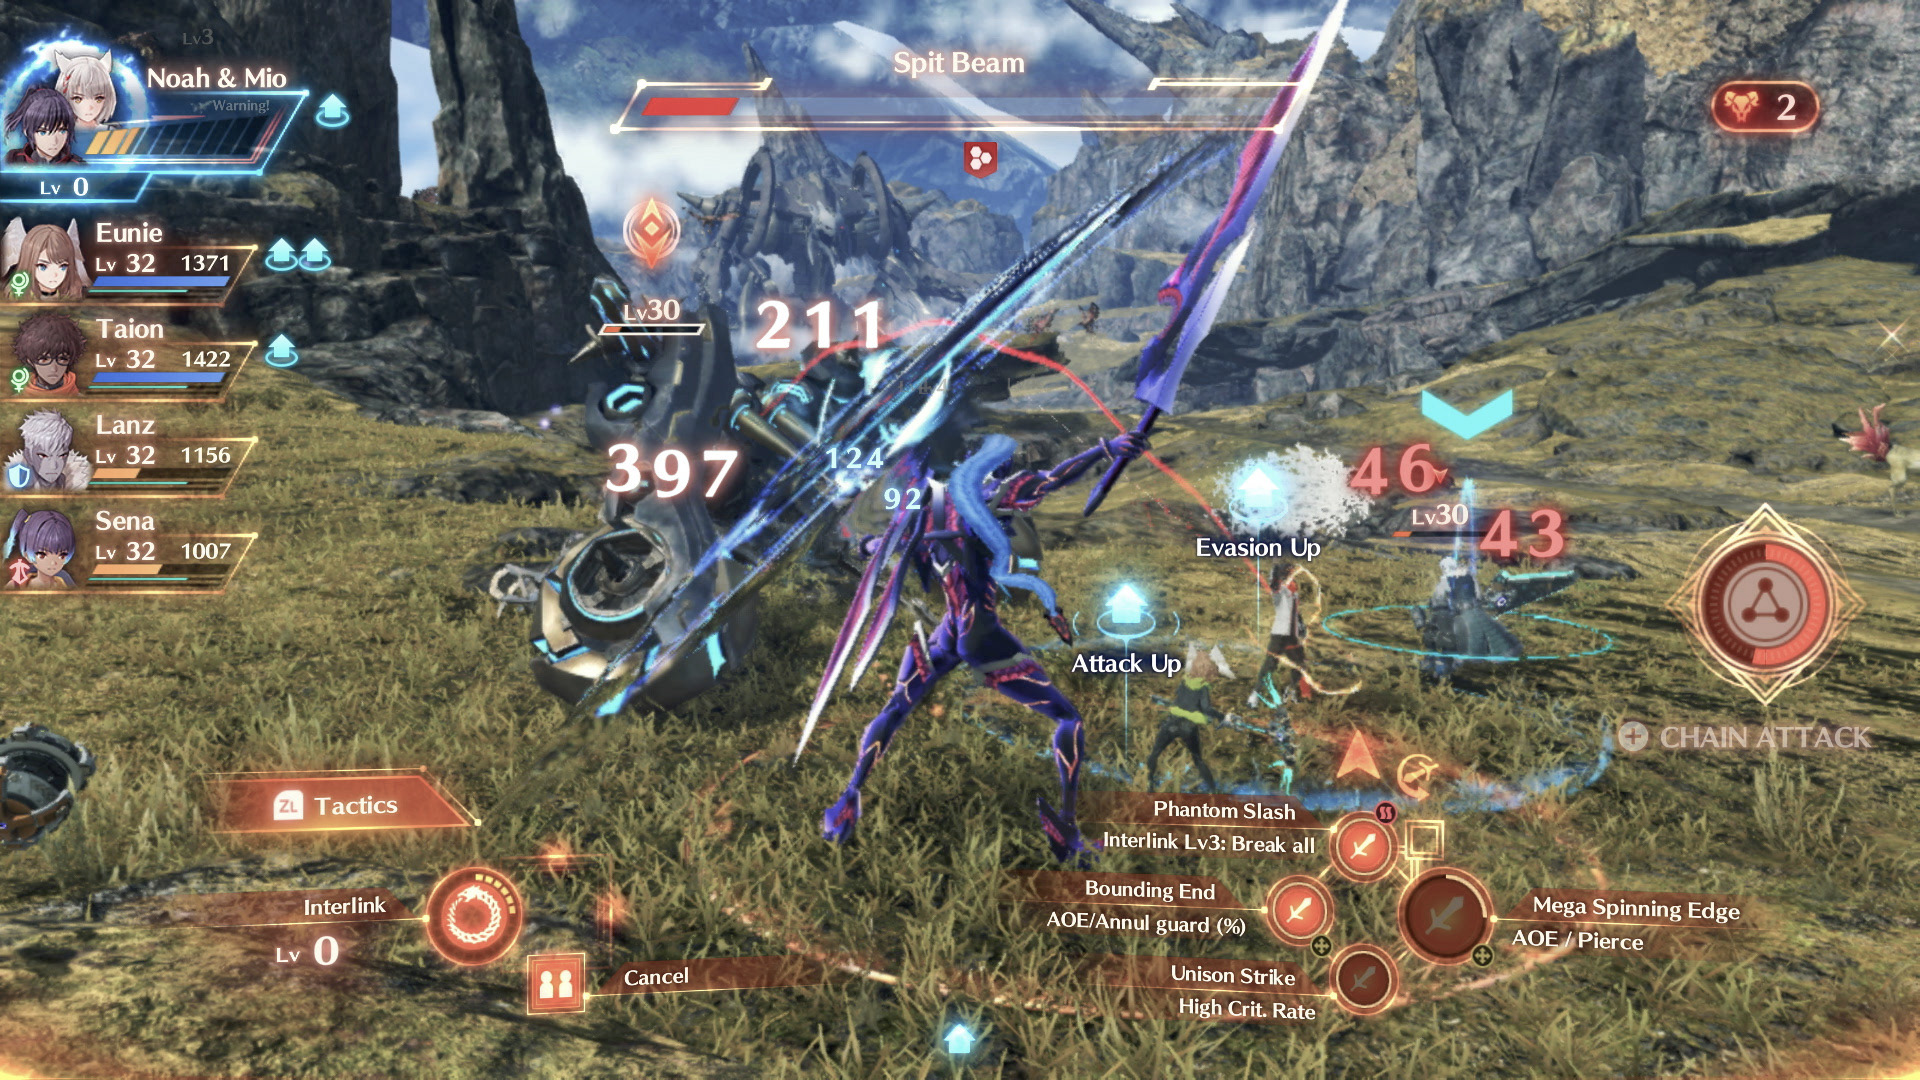 Xenoblade Chronicles 3 release date, story, and more | Pocket Tactics